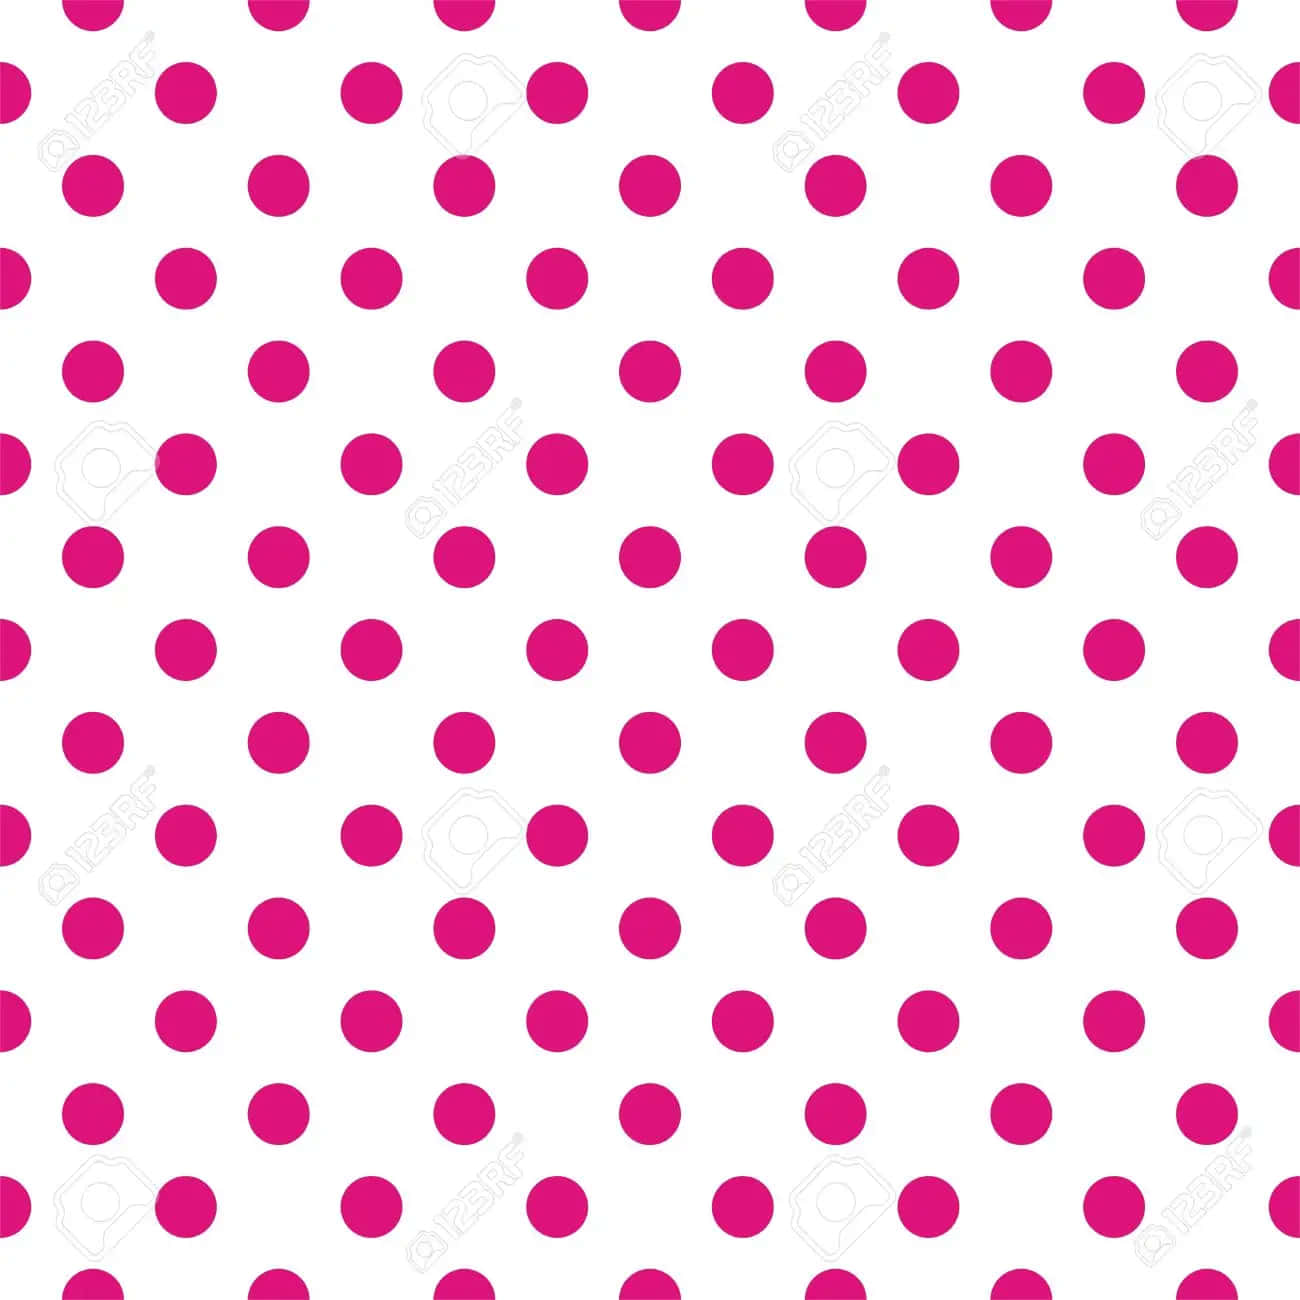 A Vivid and Cheerful Pattern of Pink and White Polka Dots Wallpaper